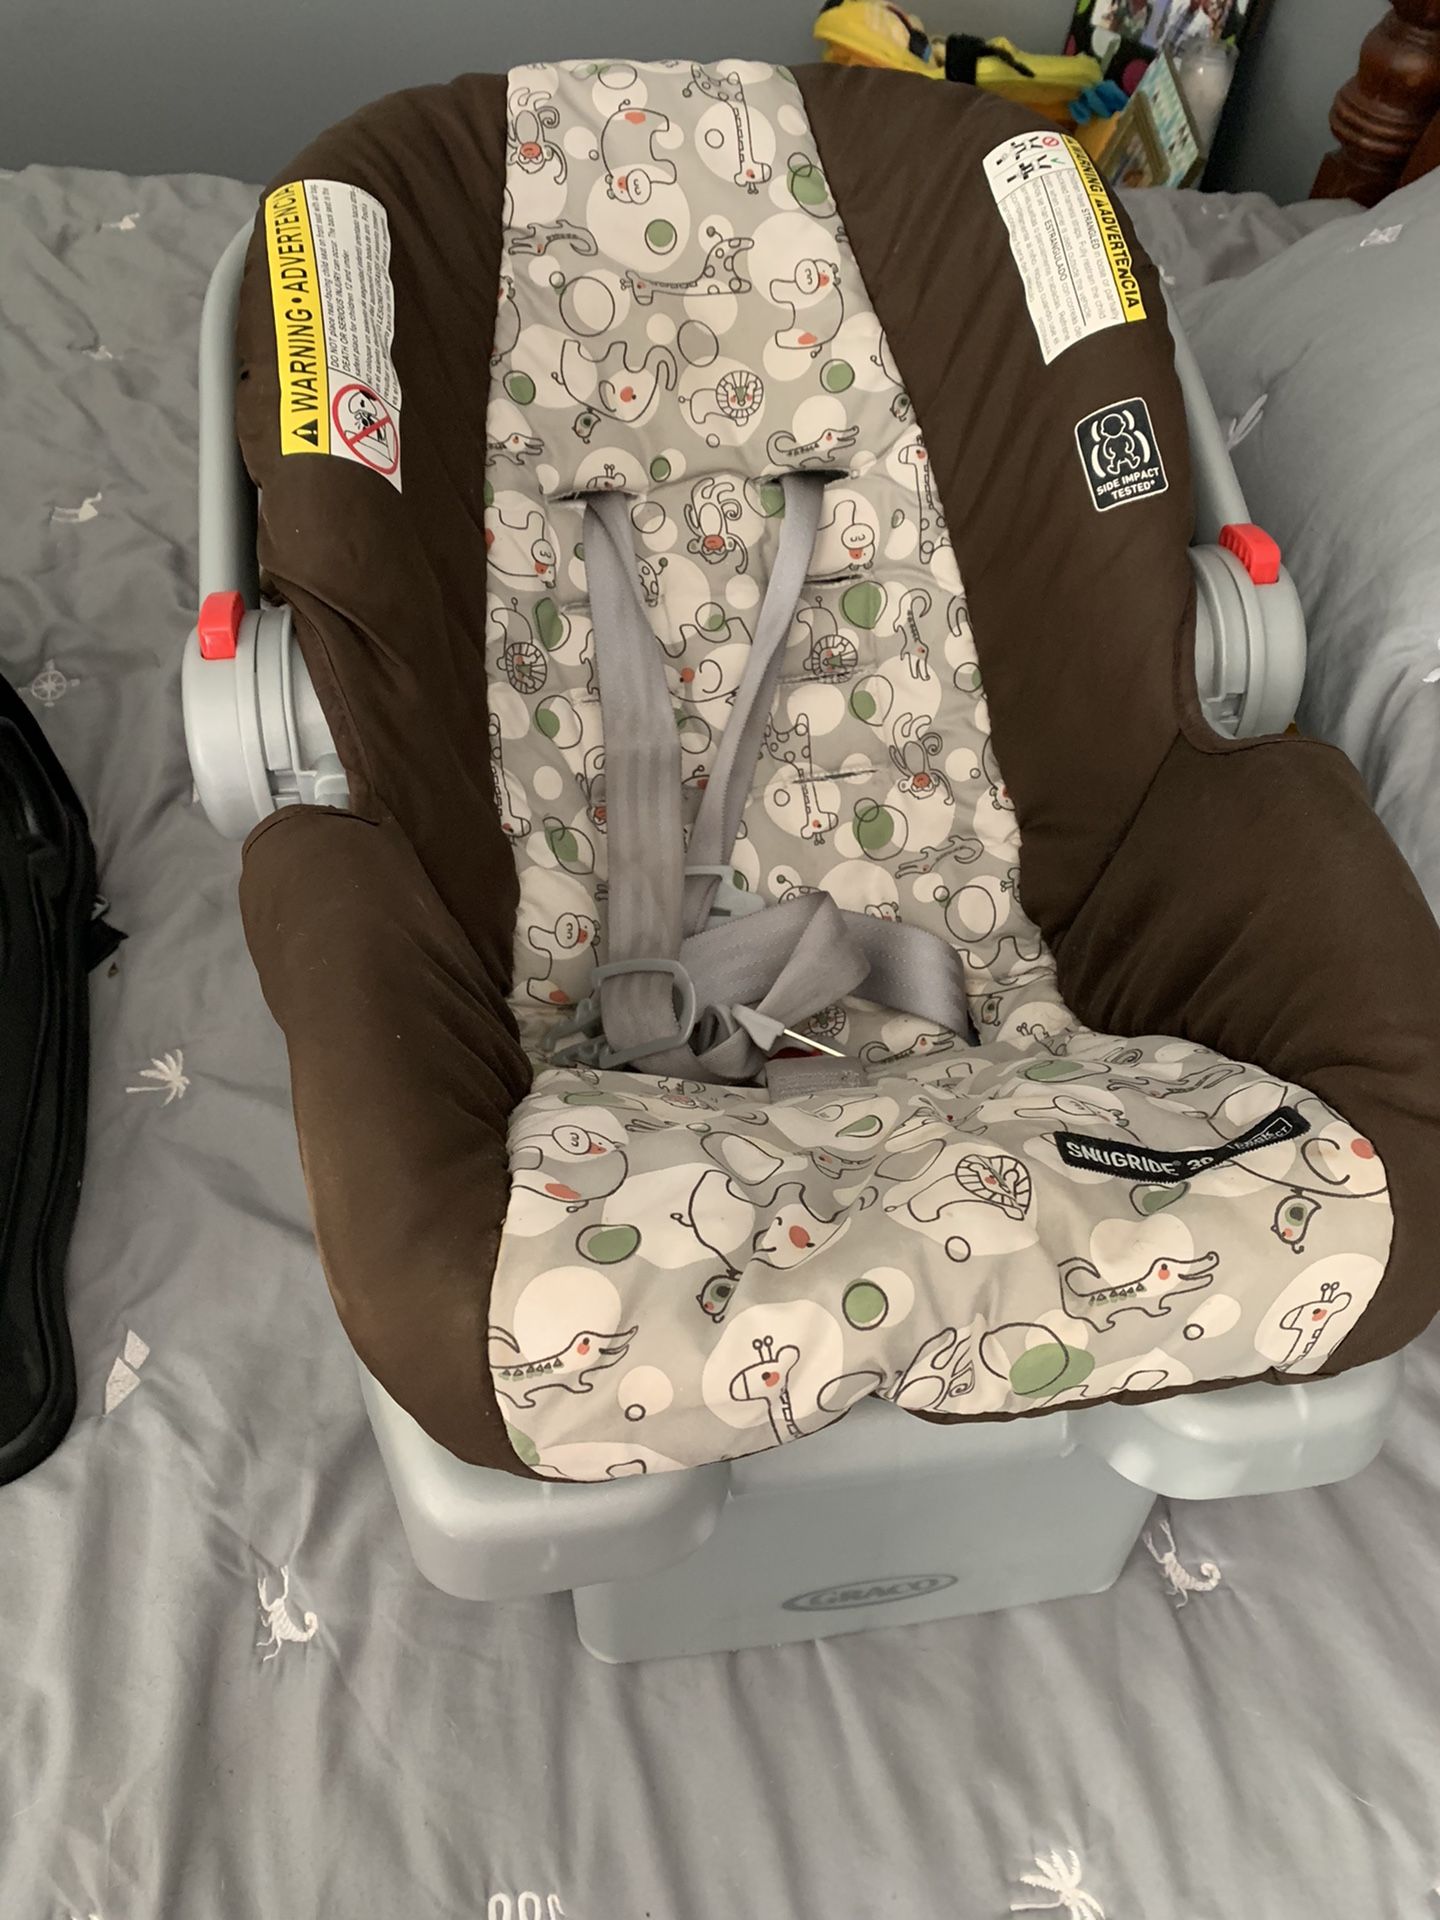 Infant car seat with base